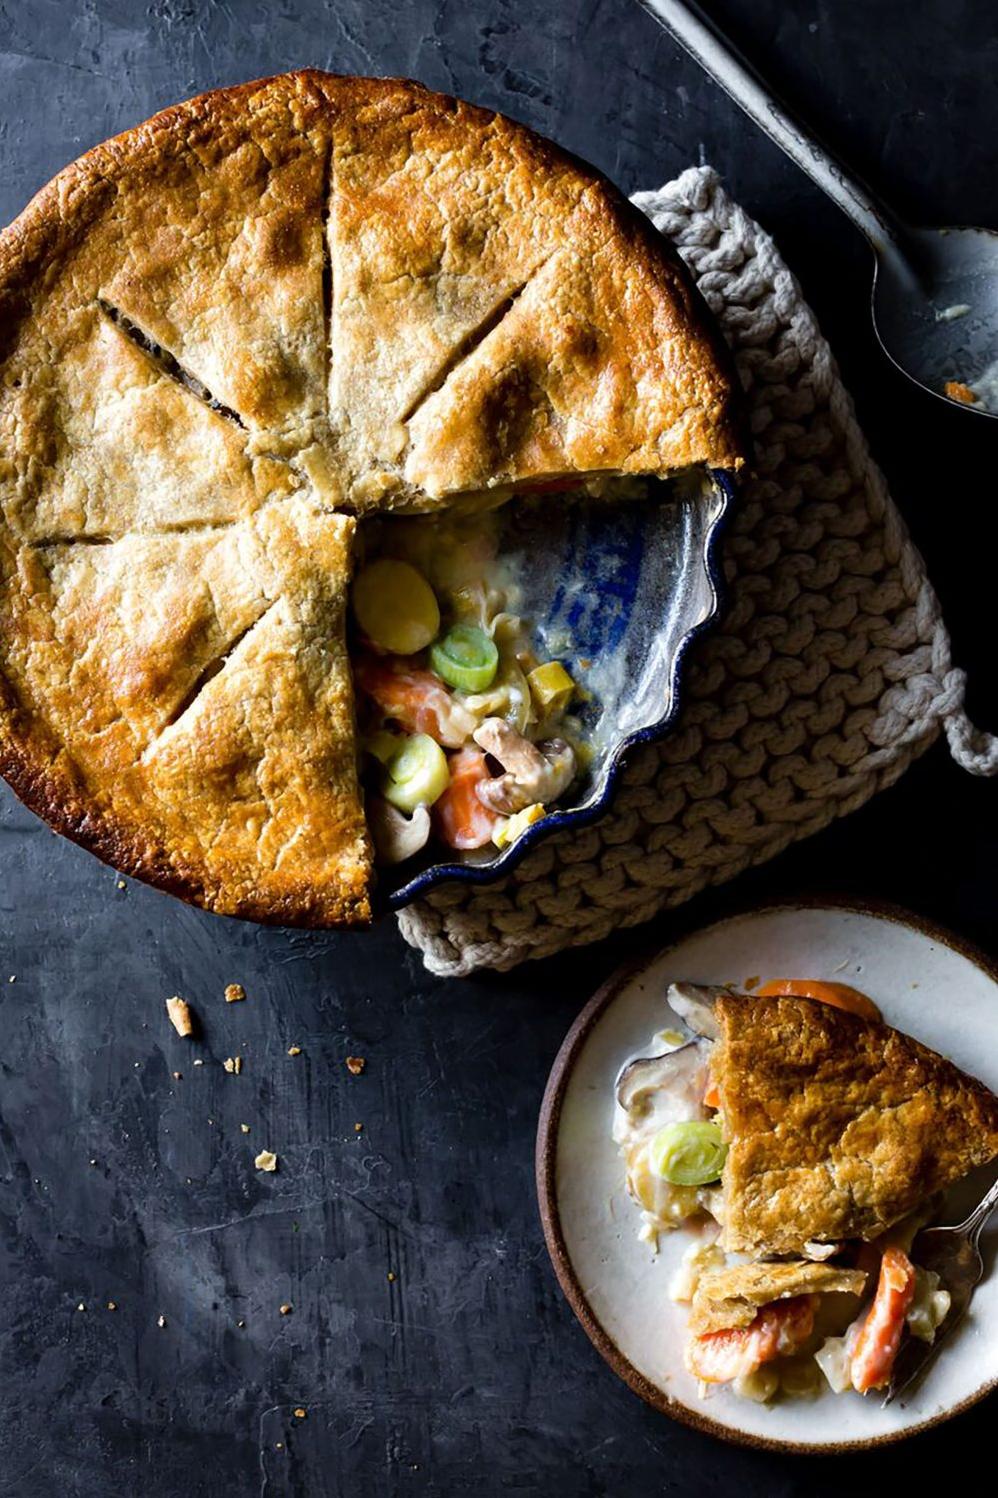  Mouthwatering gluten-free vegetable pie perfect for a healthy lunch!